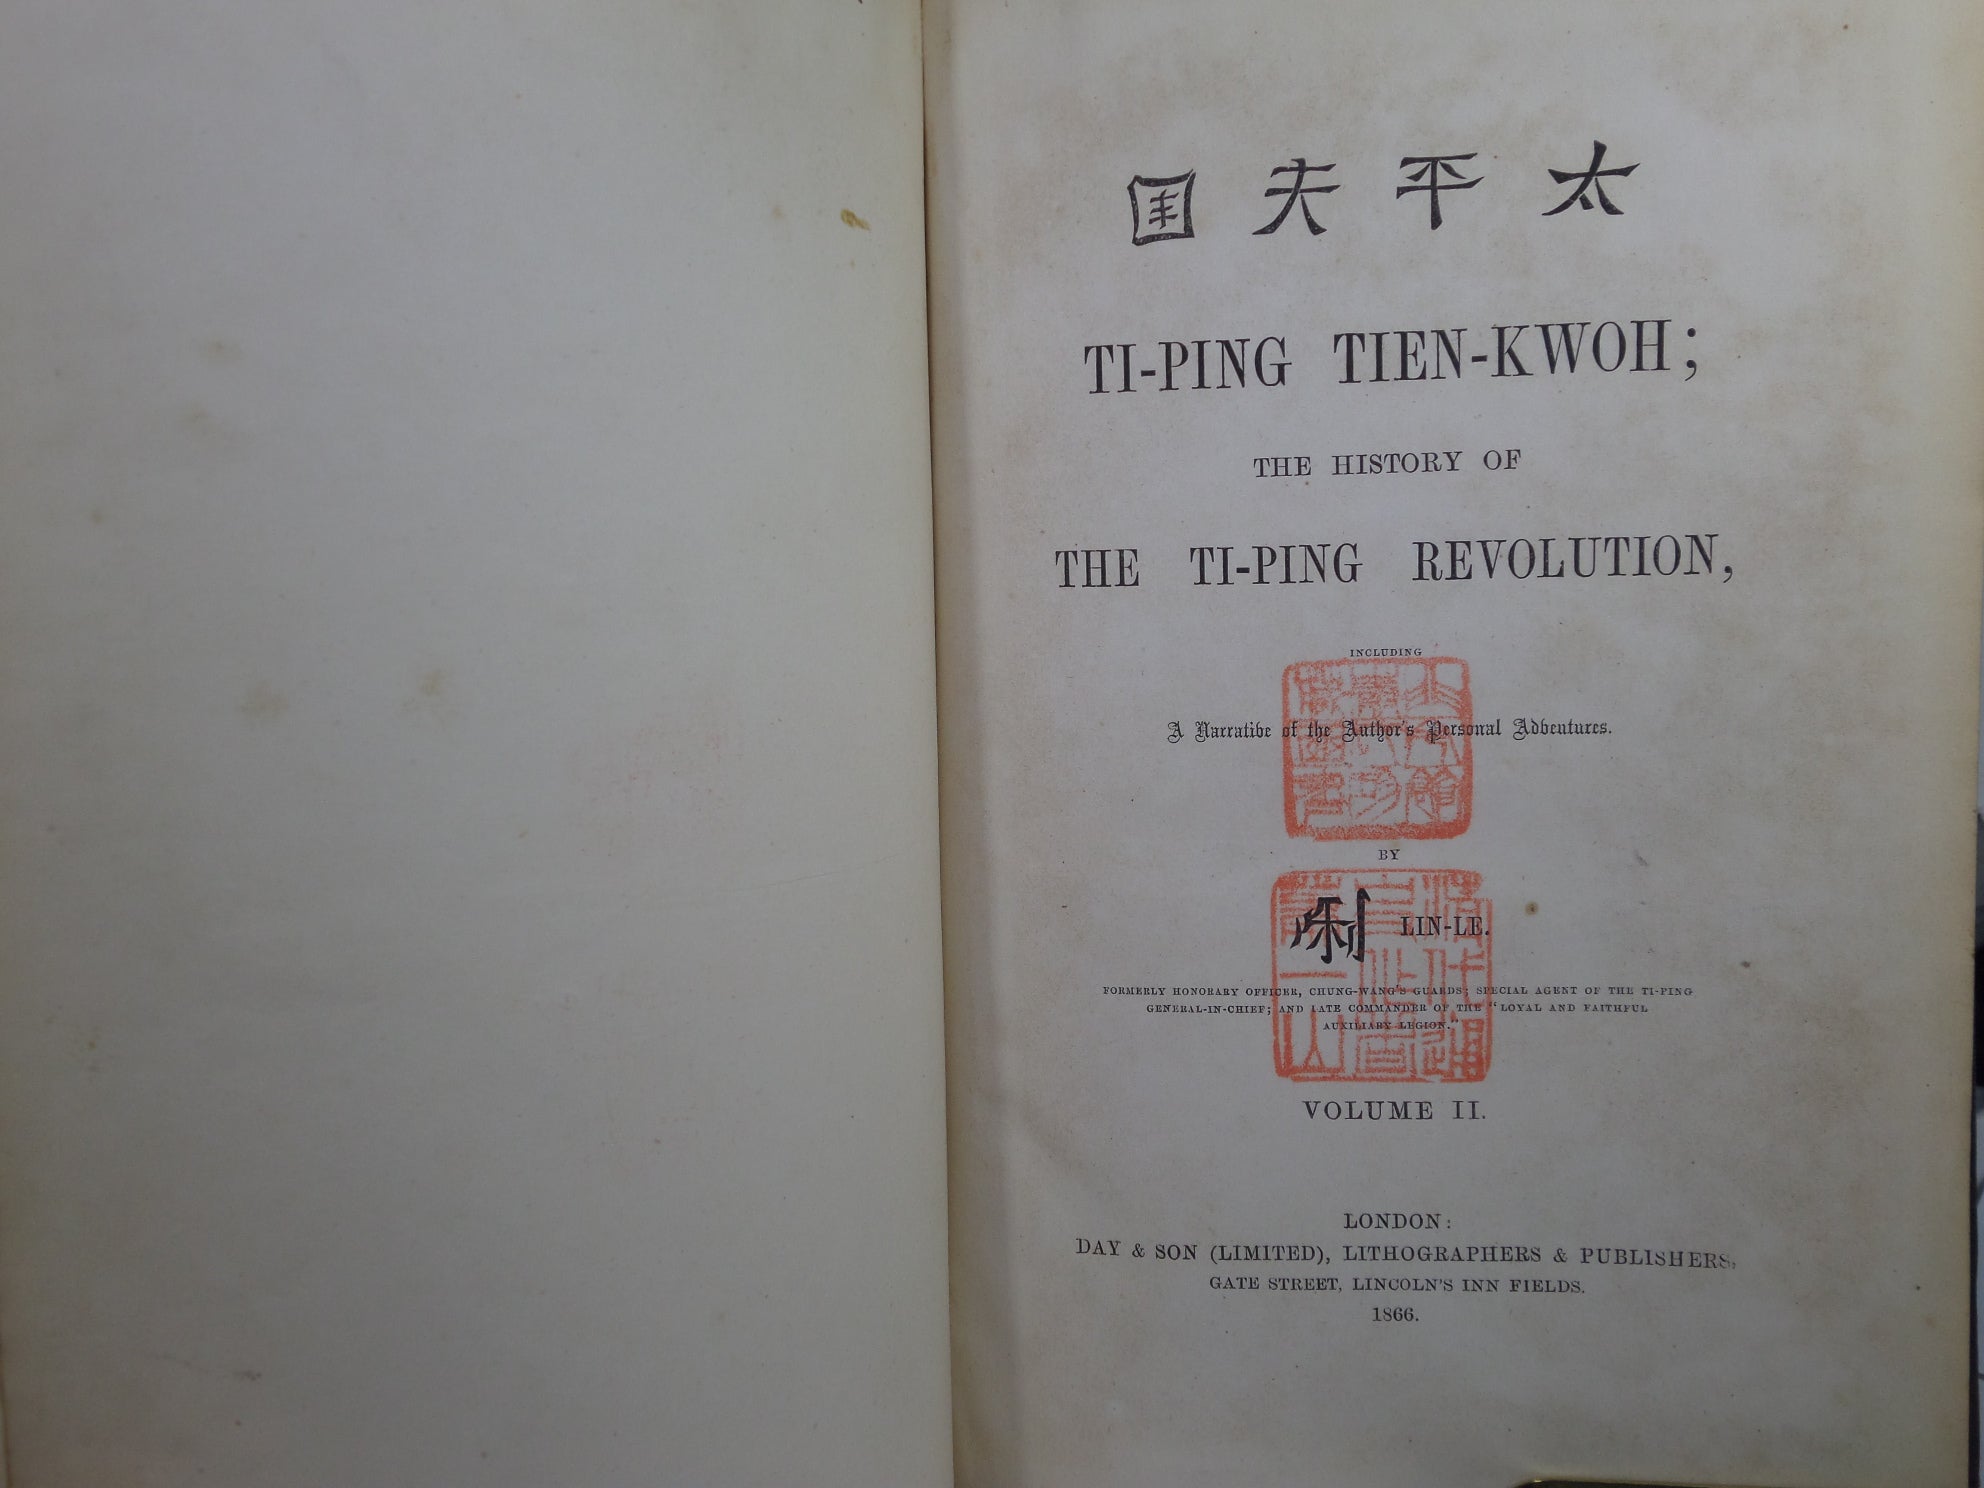 THE HISTORY OF THE TI-PING REVOLUTION BY AUGUSTUS F. LINDLEY 1866 FIRST EDITION